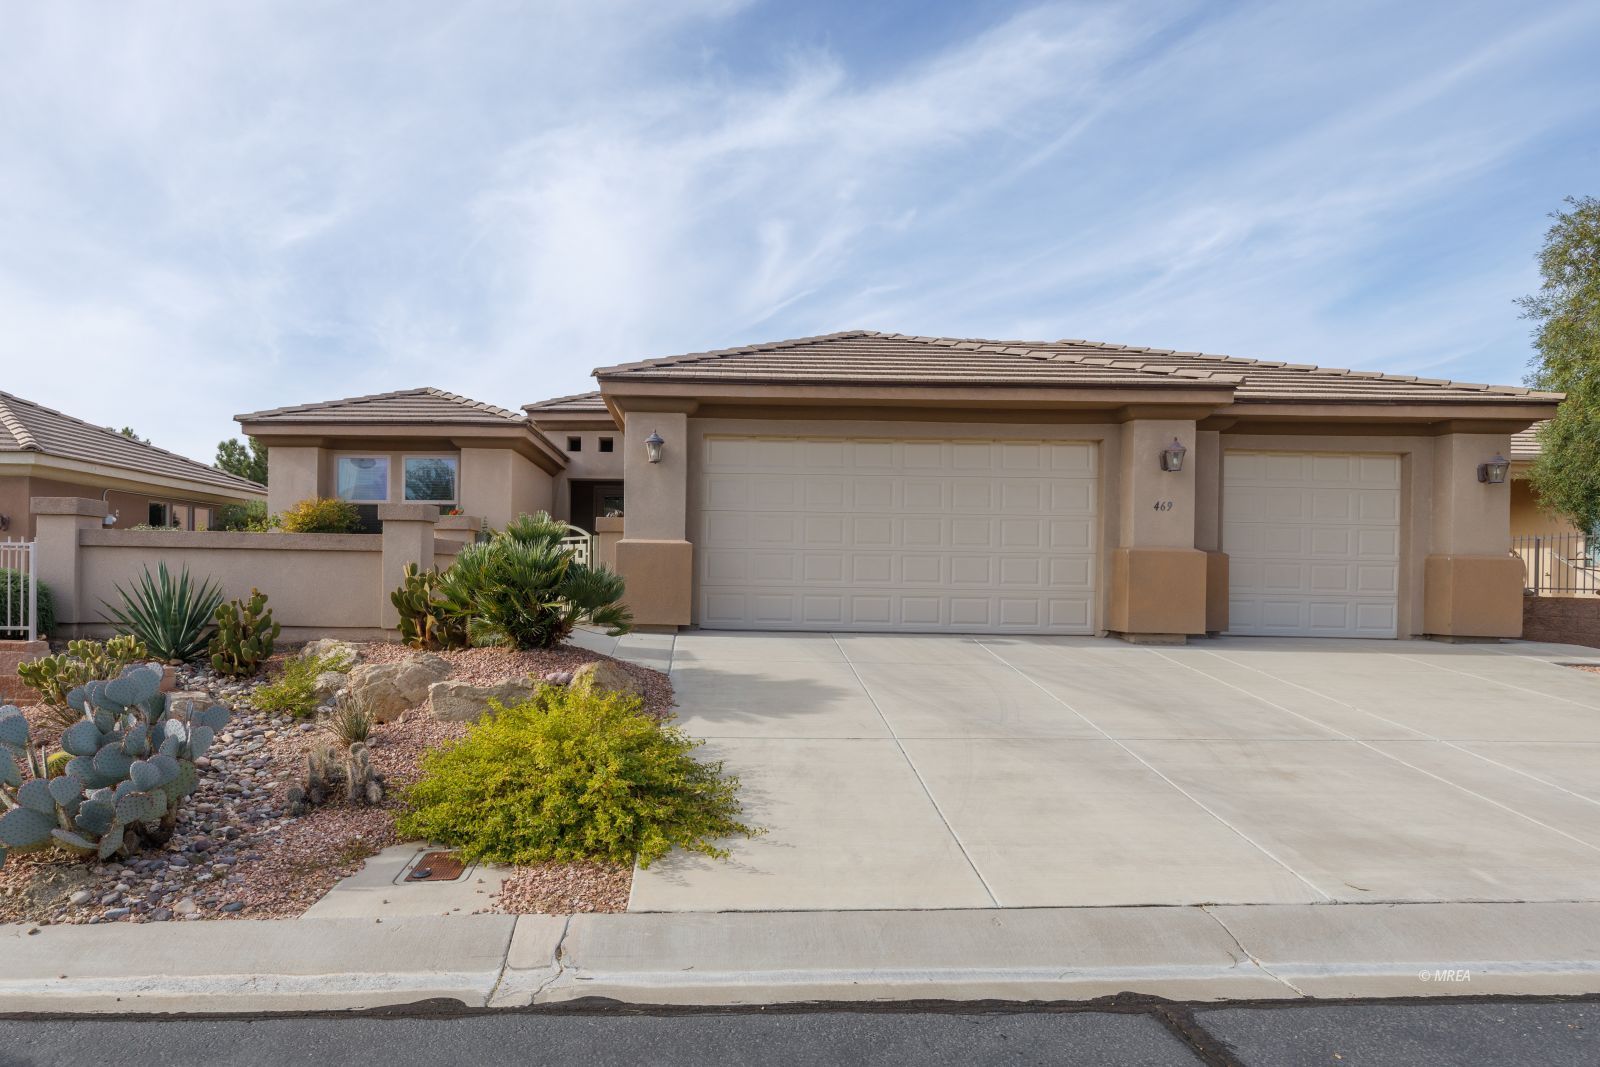 469 Highland View Ct, Mesquite NV 89027